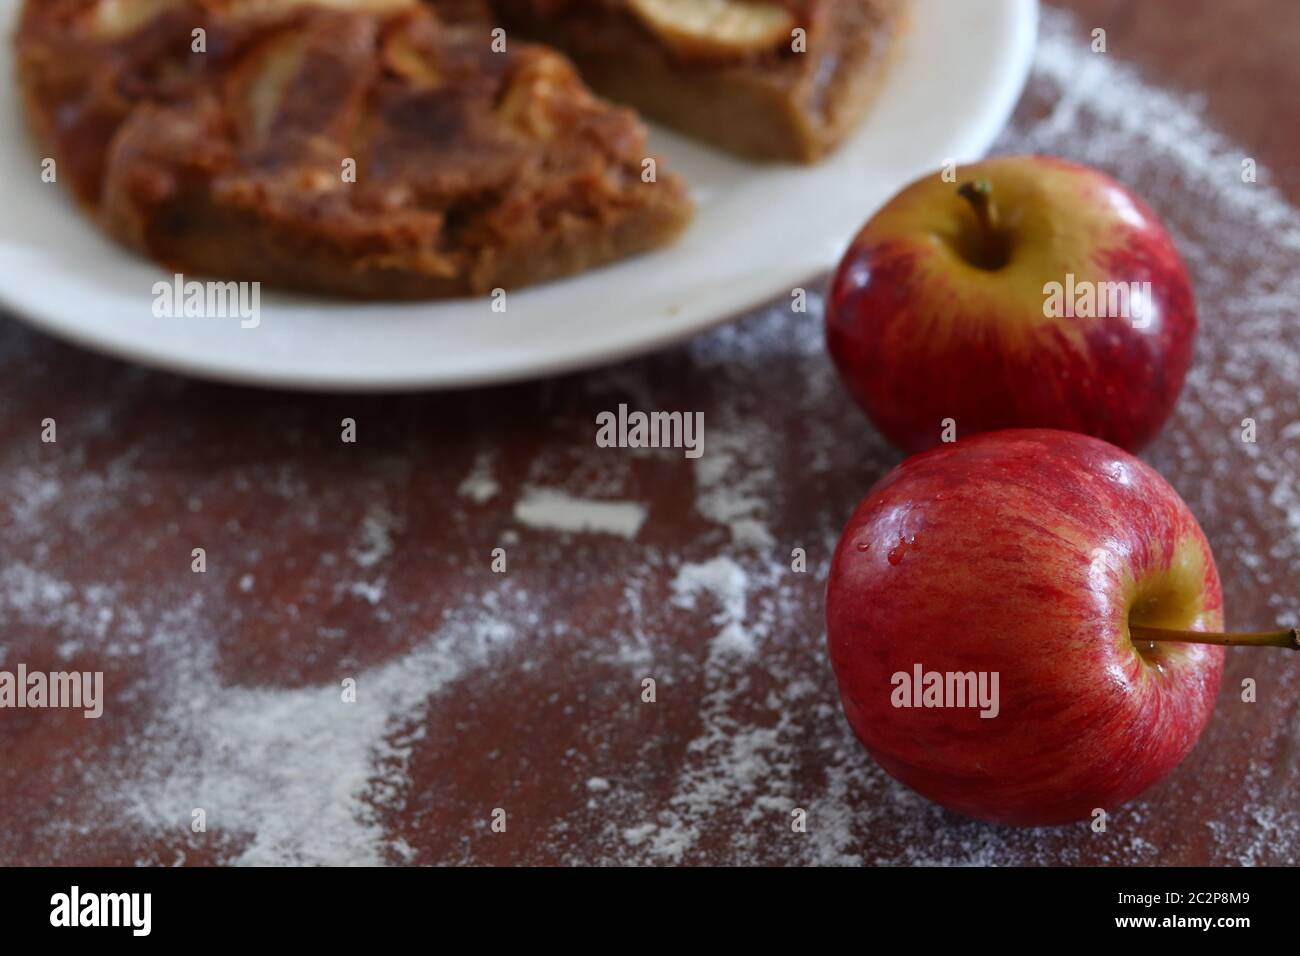 Fresh apples for baking home made apple cake shot in vintage dark and moody theme Stock Photo